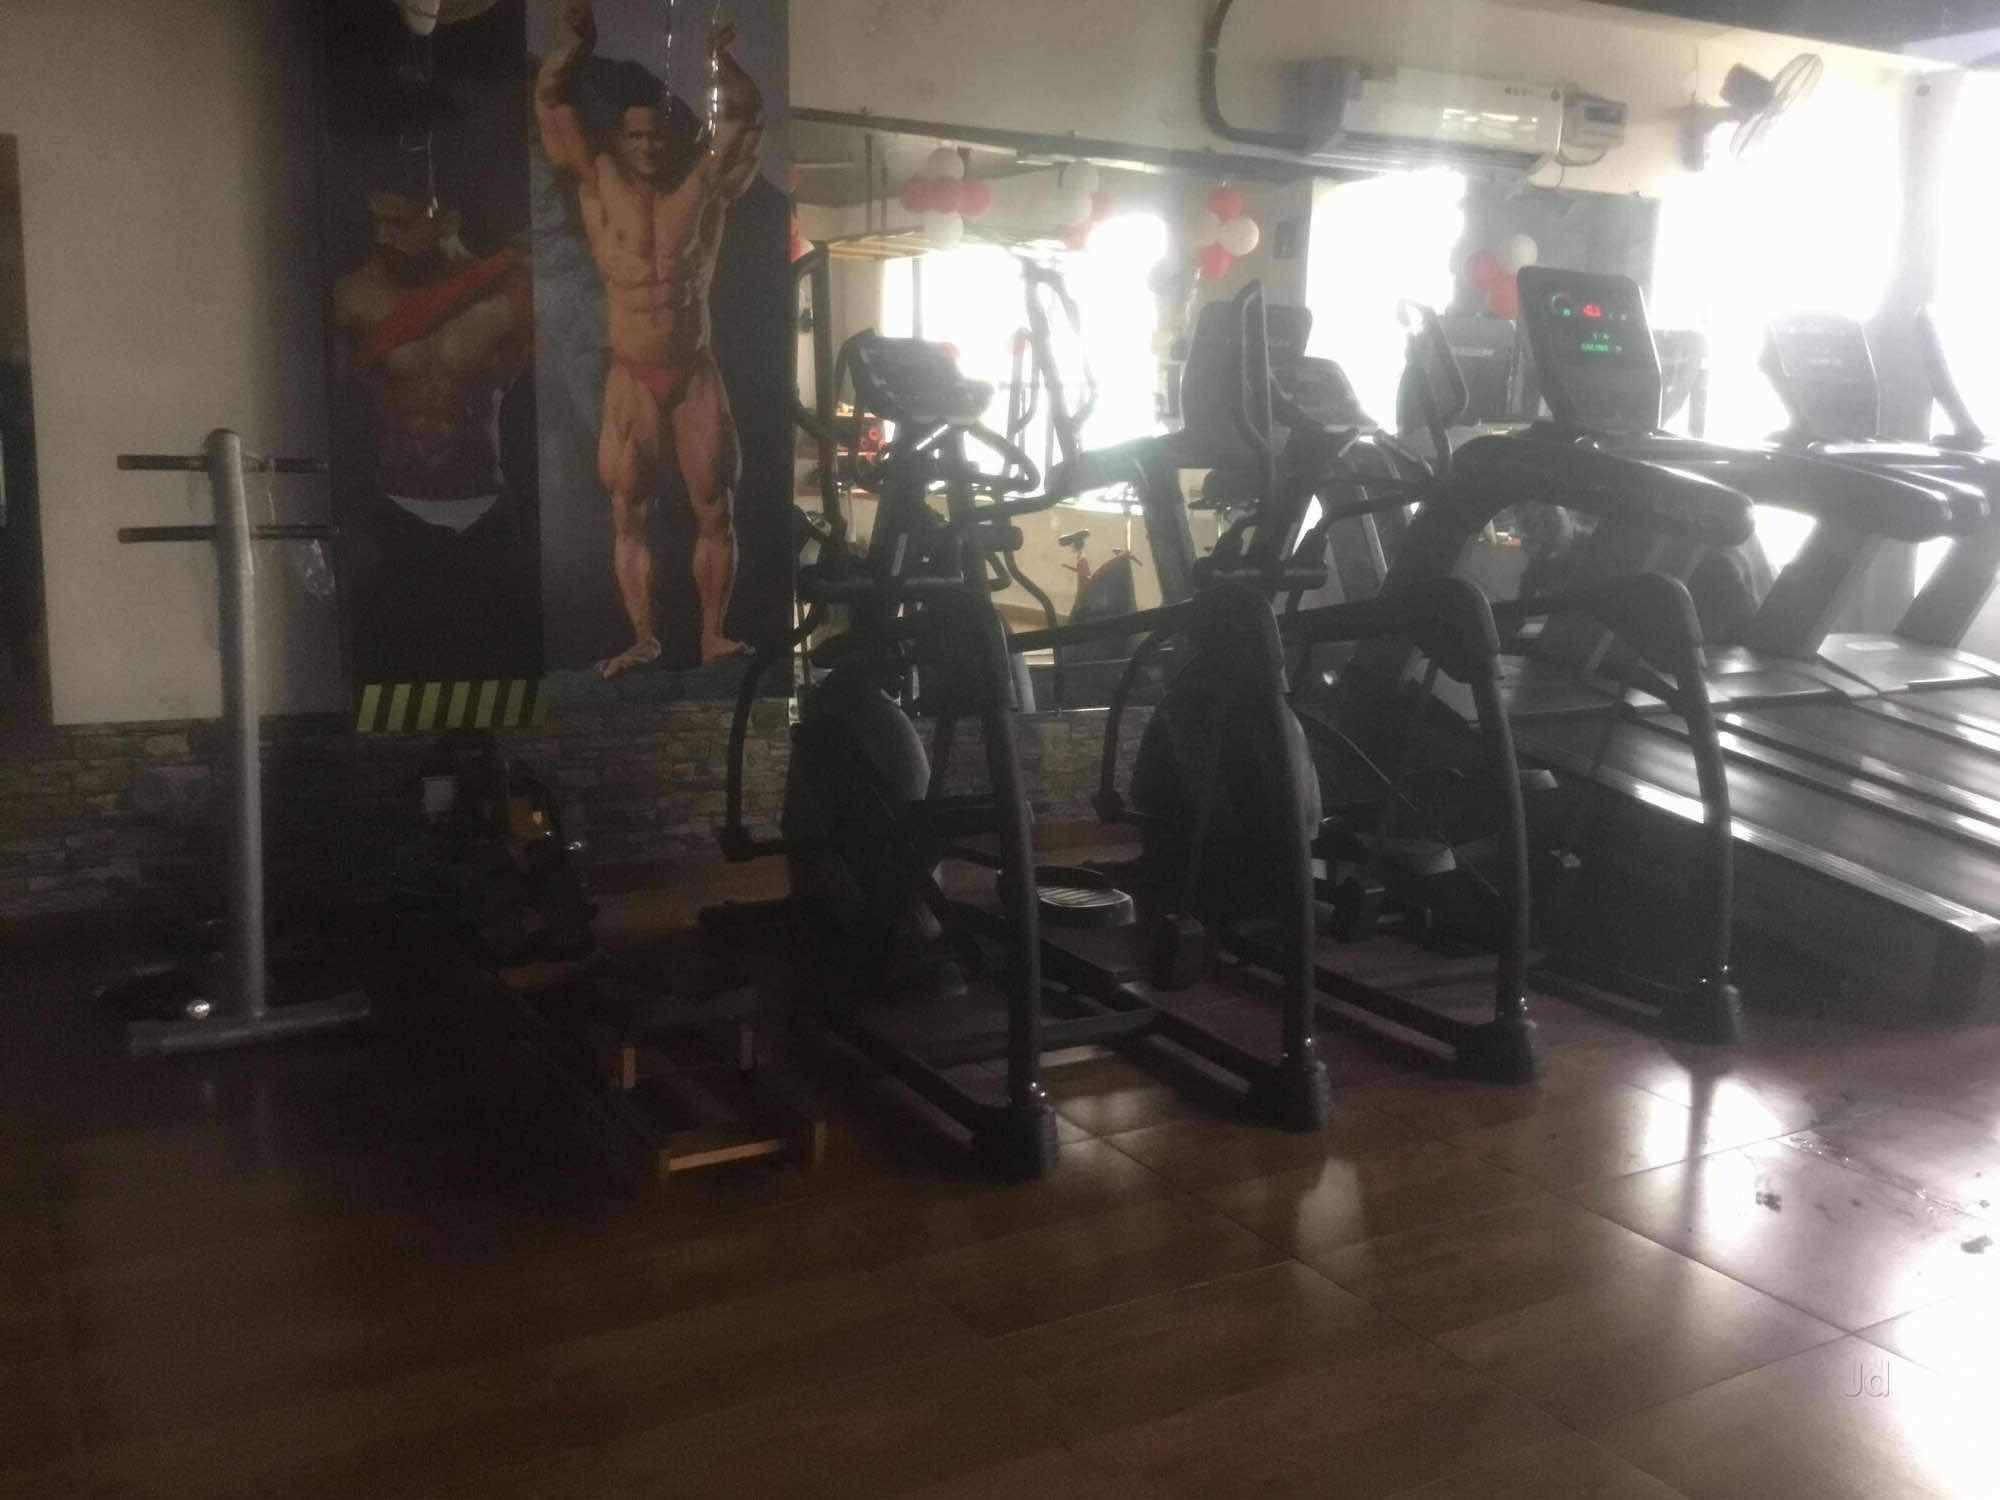 Noida-Sector-22-The-Gym_683_Njgz_MjIwNQ